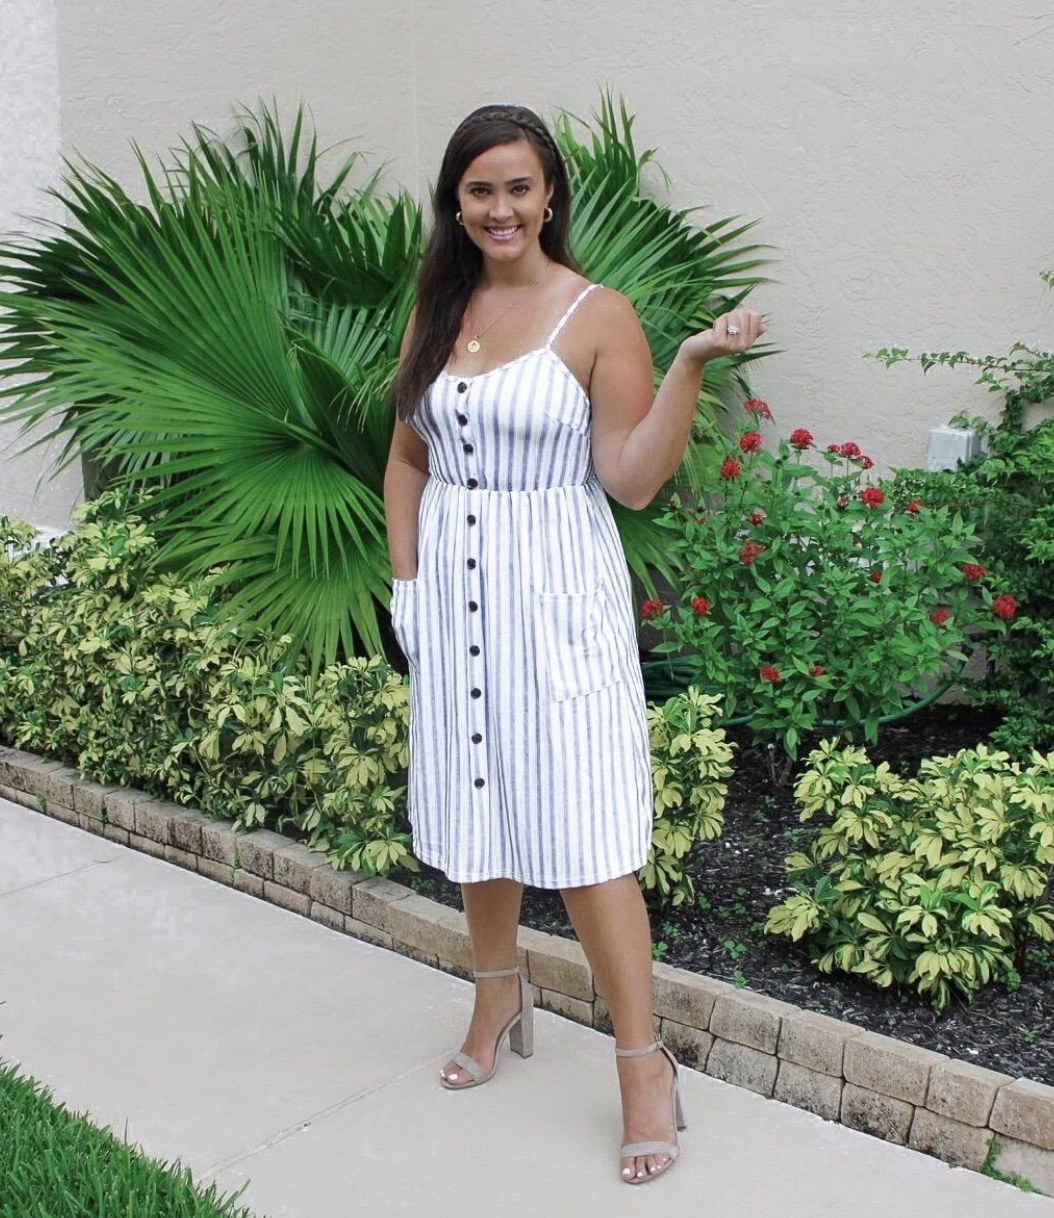 A person wearing a white and blue button-down dress